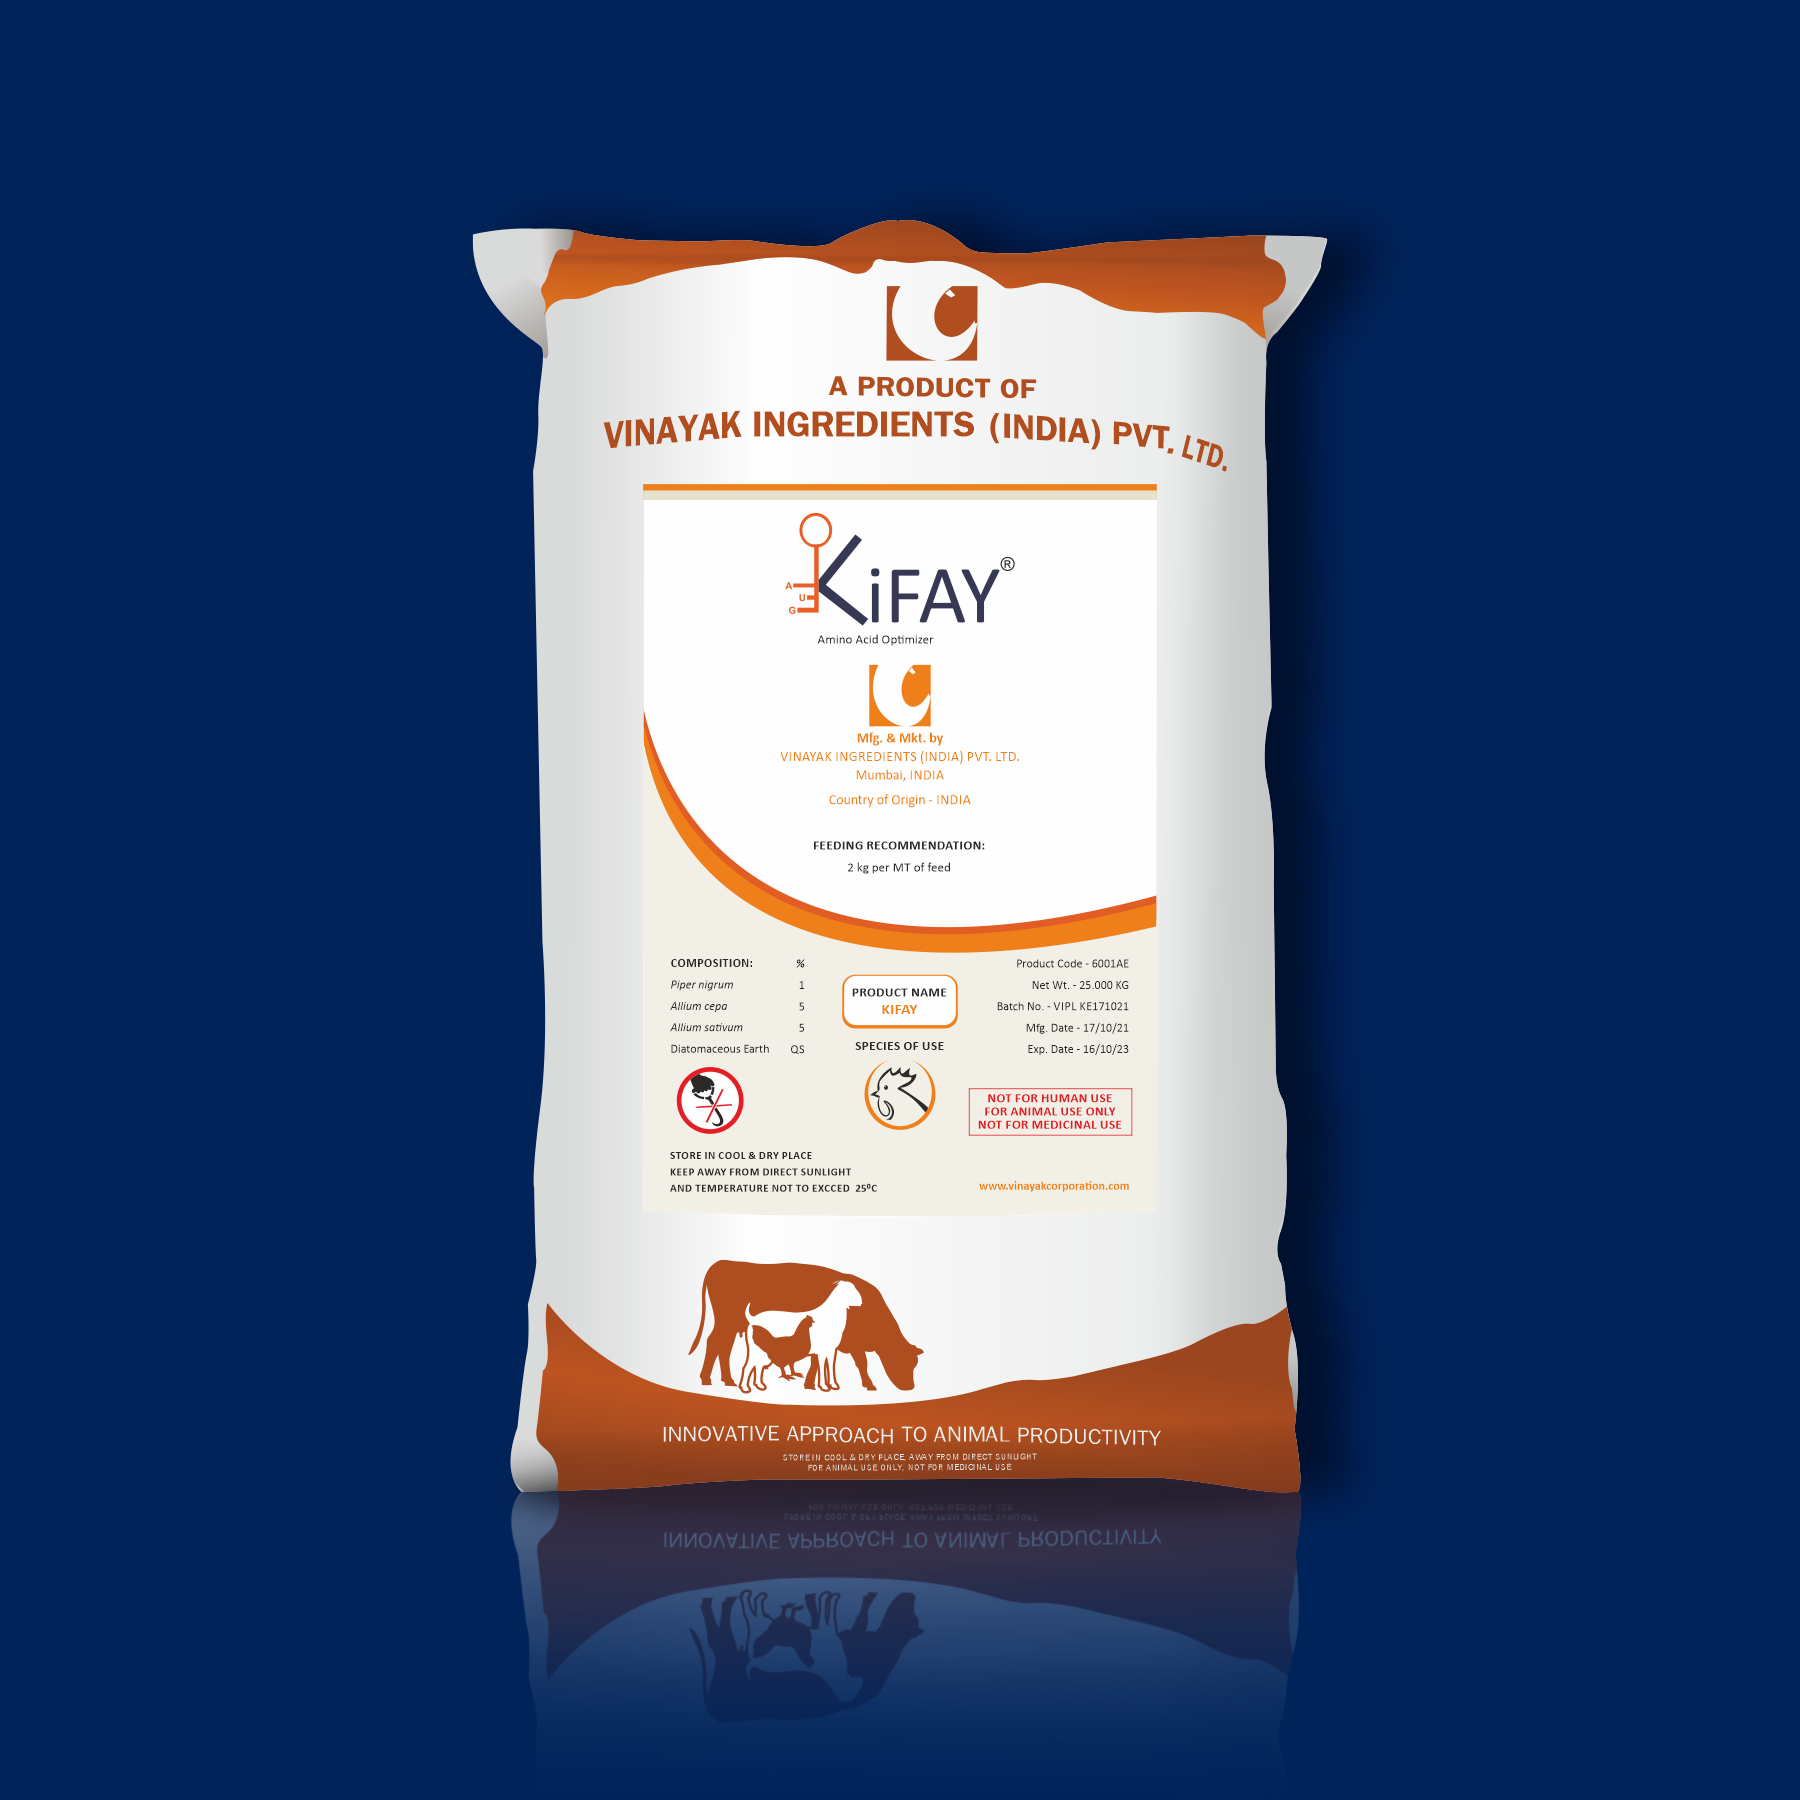 kifay - broiler growth booster - Herbal growth promoter for poultry - Improve FCR in poultry - natural growth booster for broilers - Vinayak Ingredients India Pvt